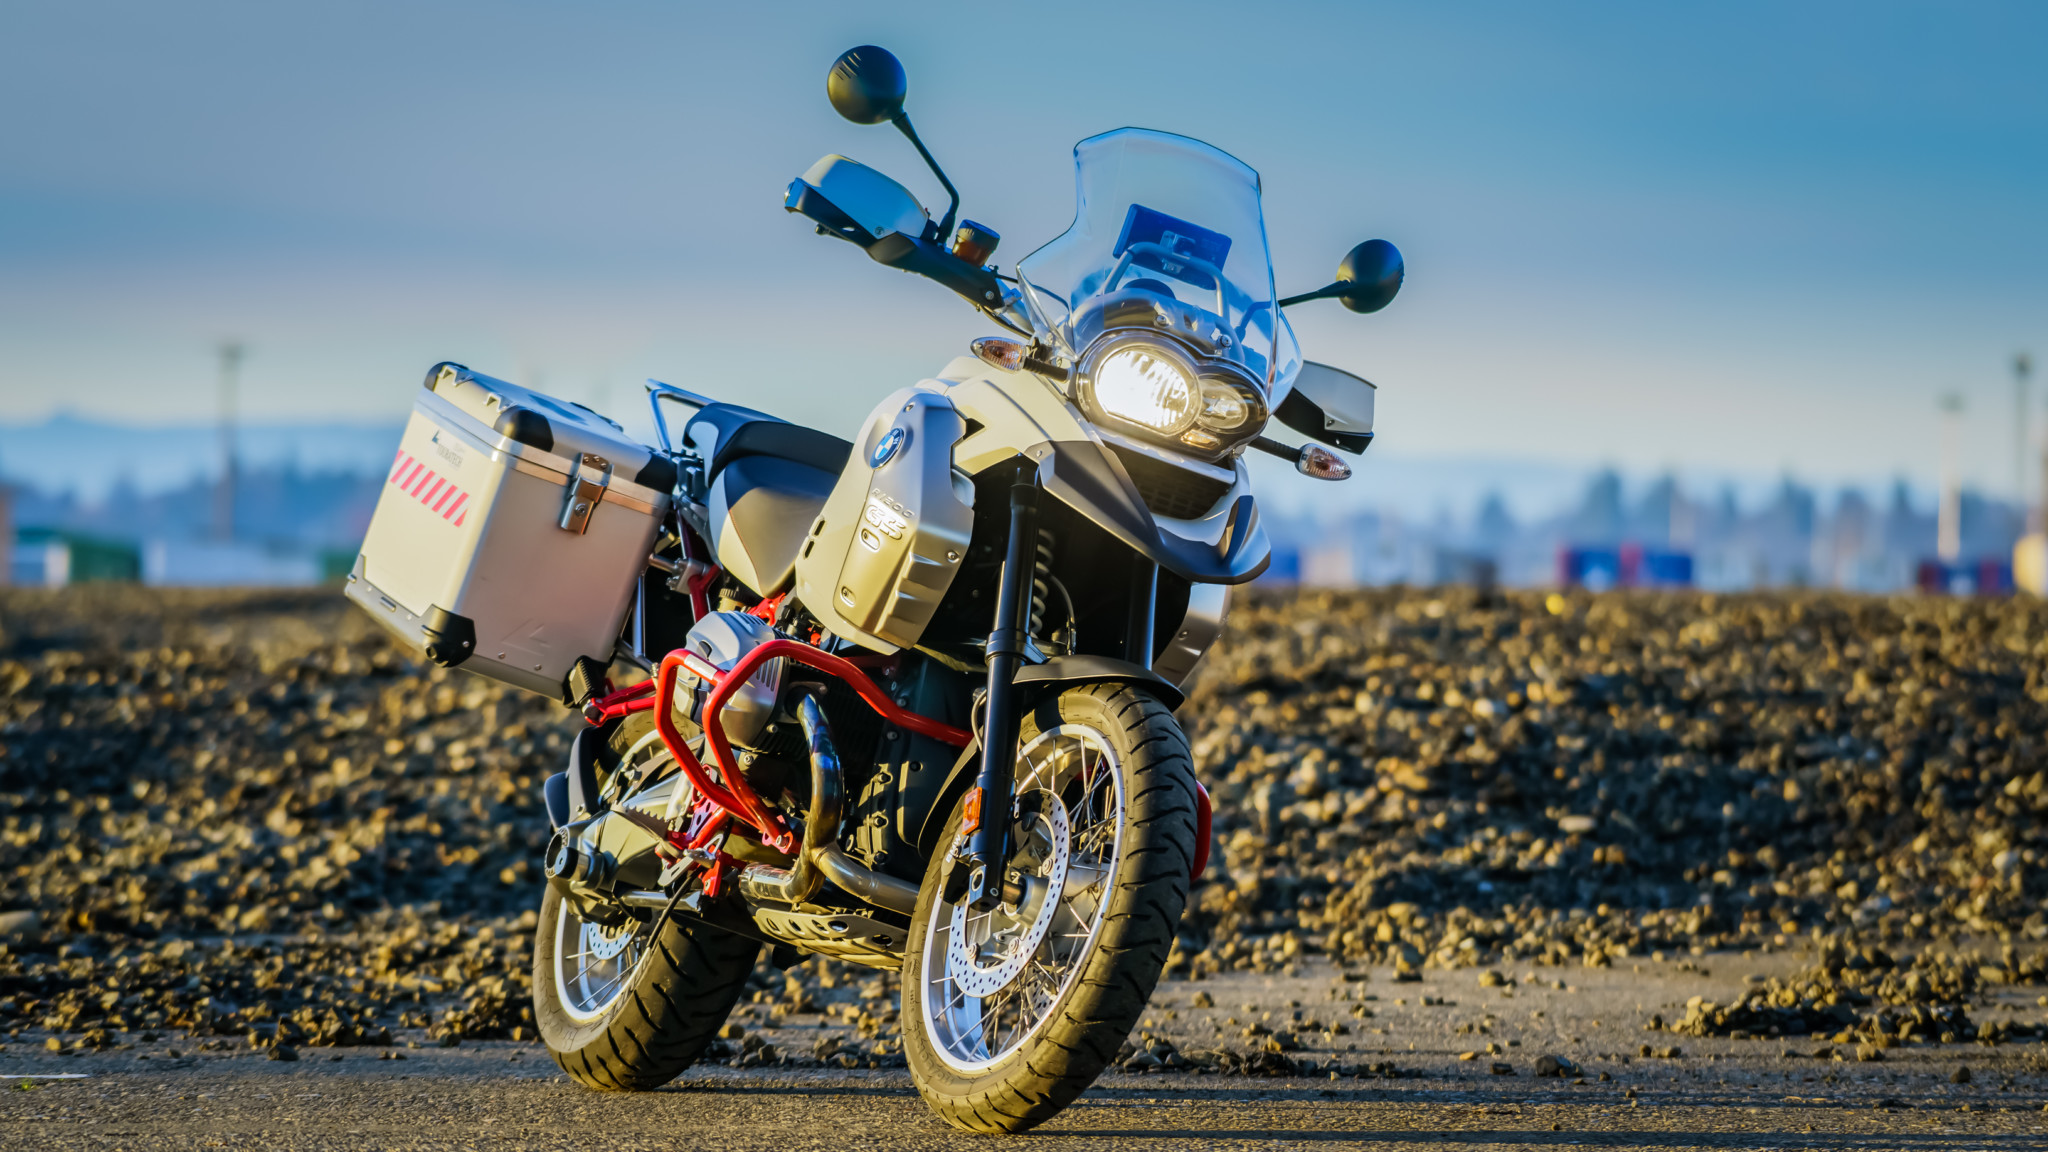 Vehicles BMW R1200GS HD Wallpaper | Background Image